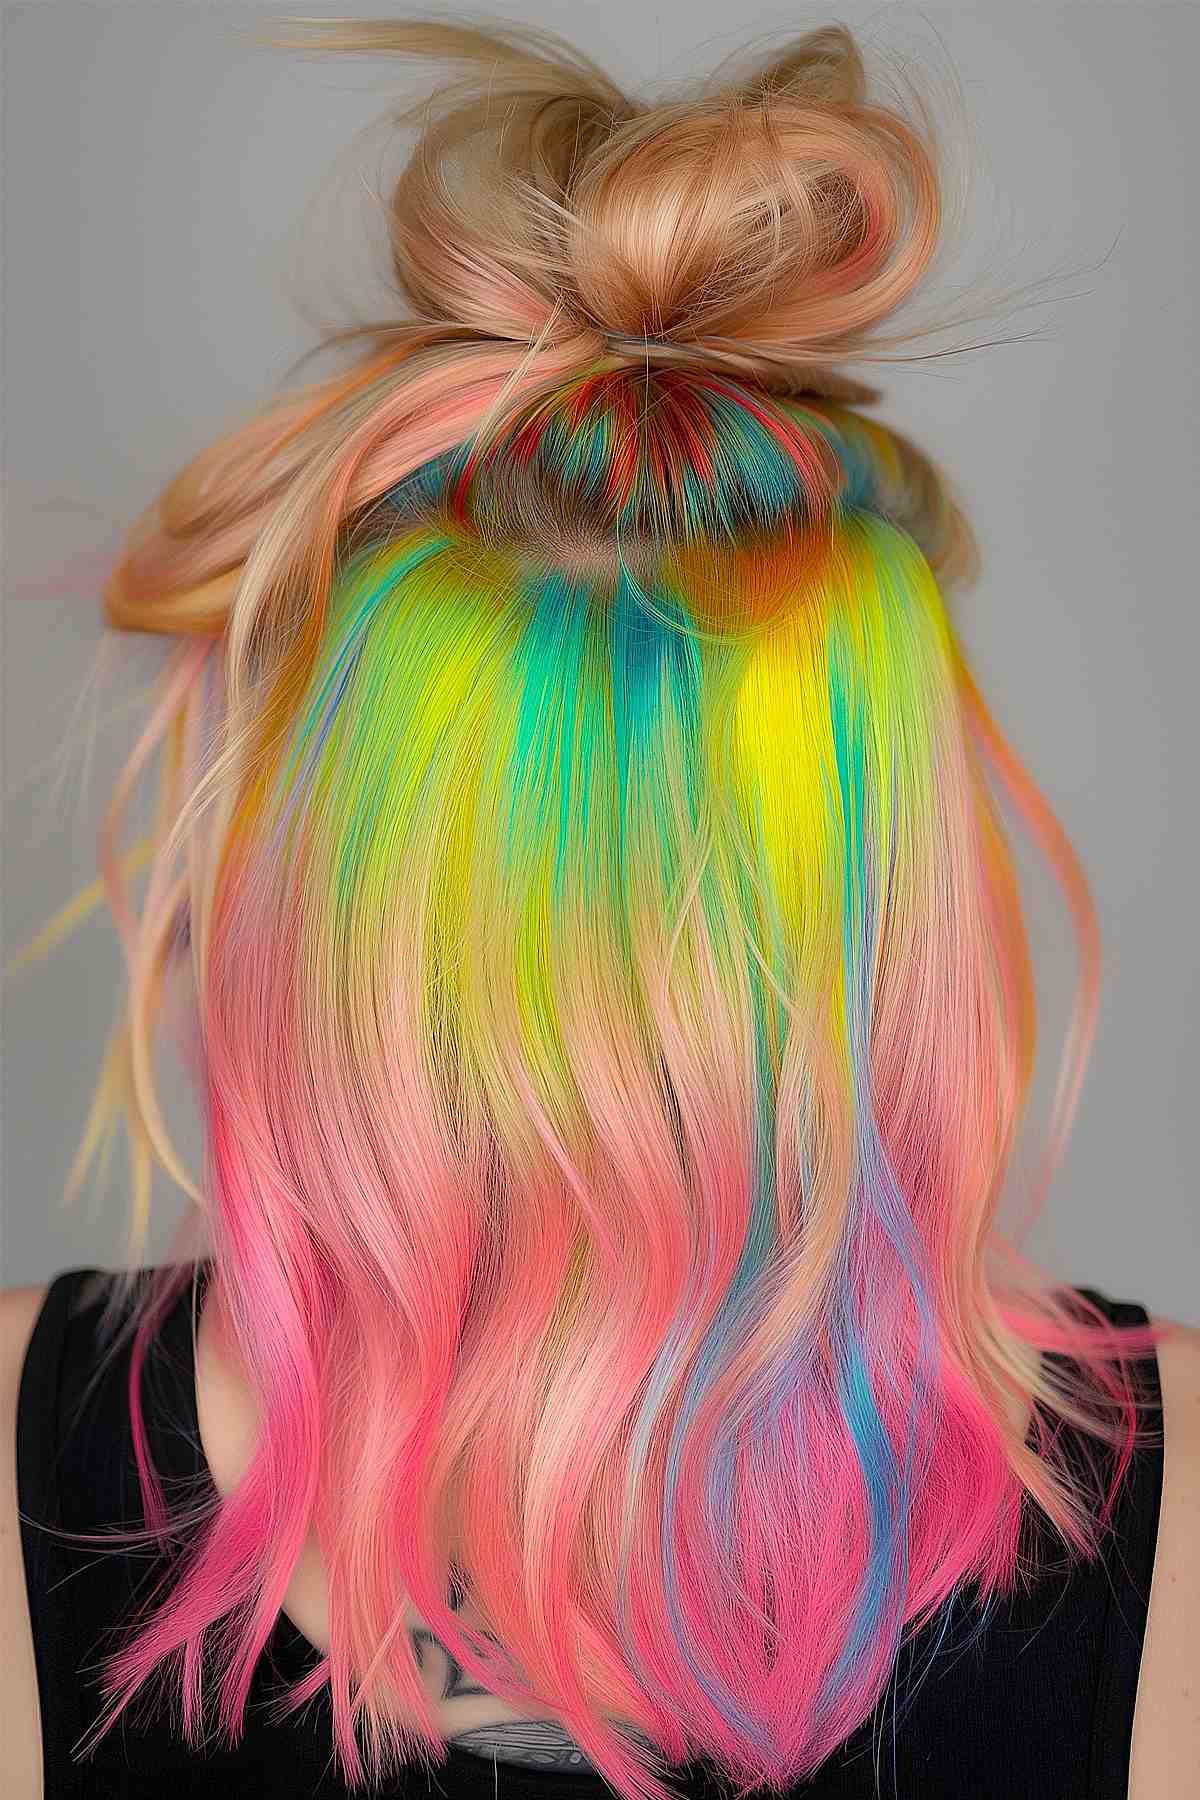 Hair styled into a top knot with hidden vivid rainbow colors transitioning from natural blonde to bright red, yellow, green, blue, and pink tones.